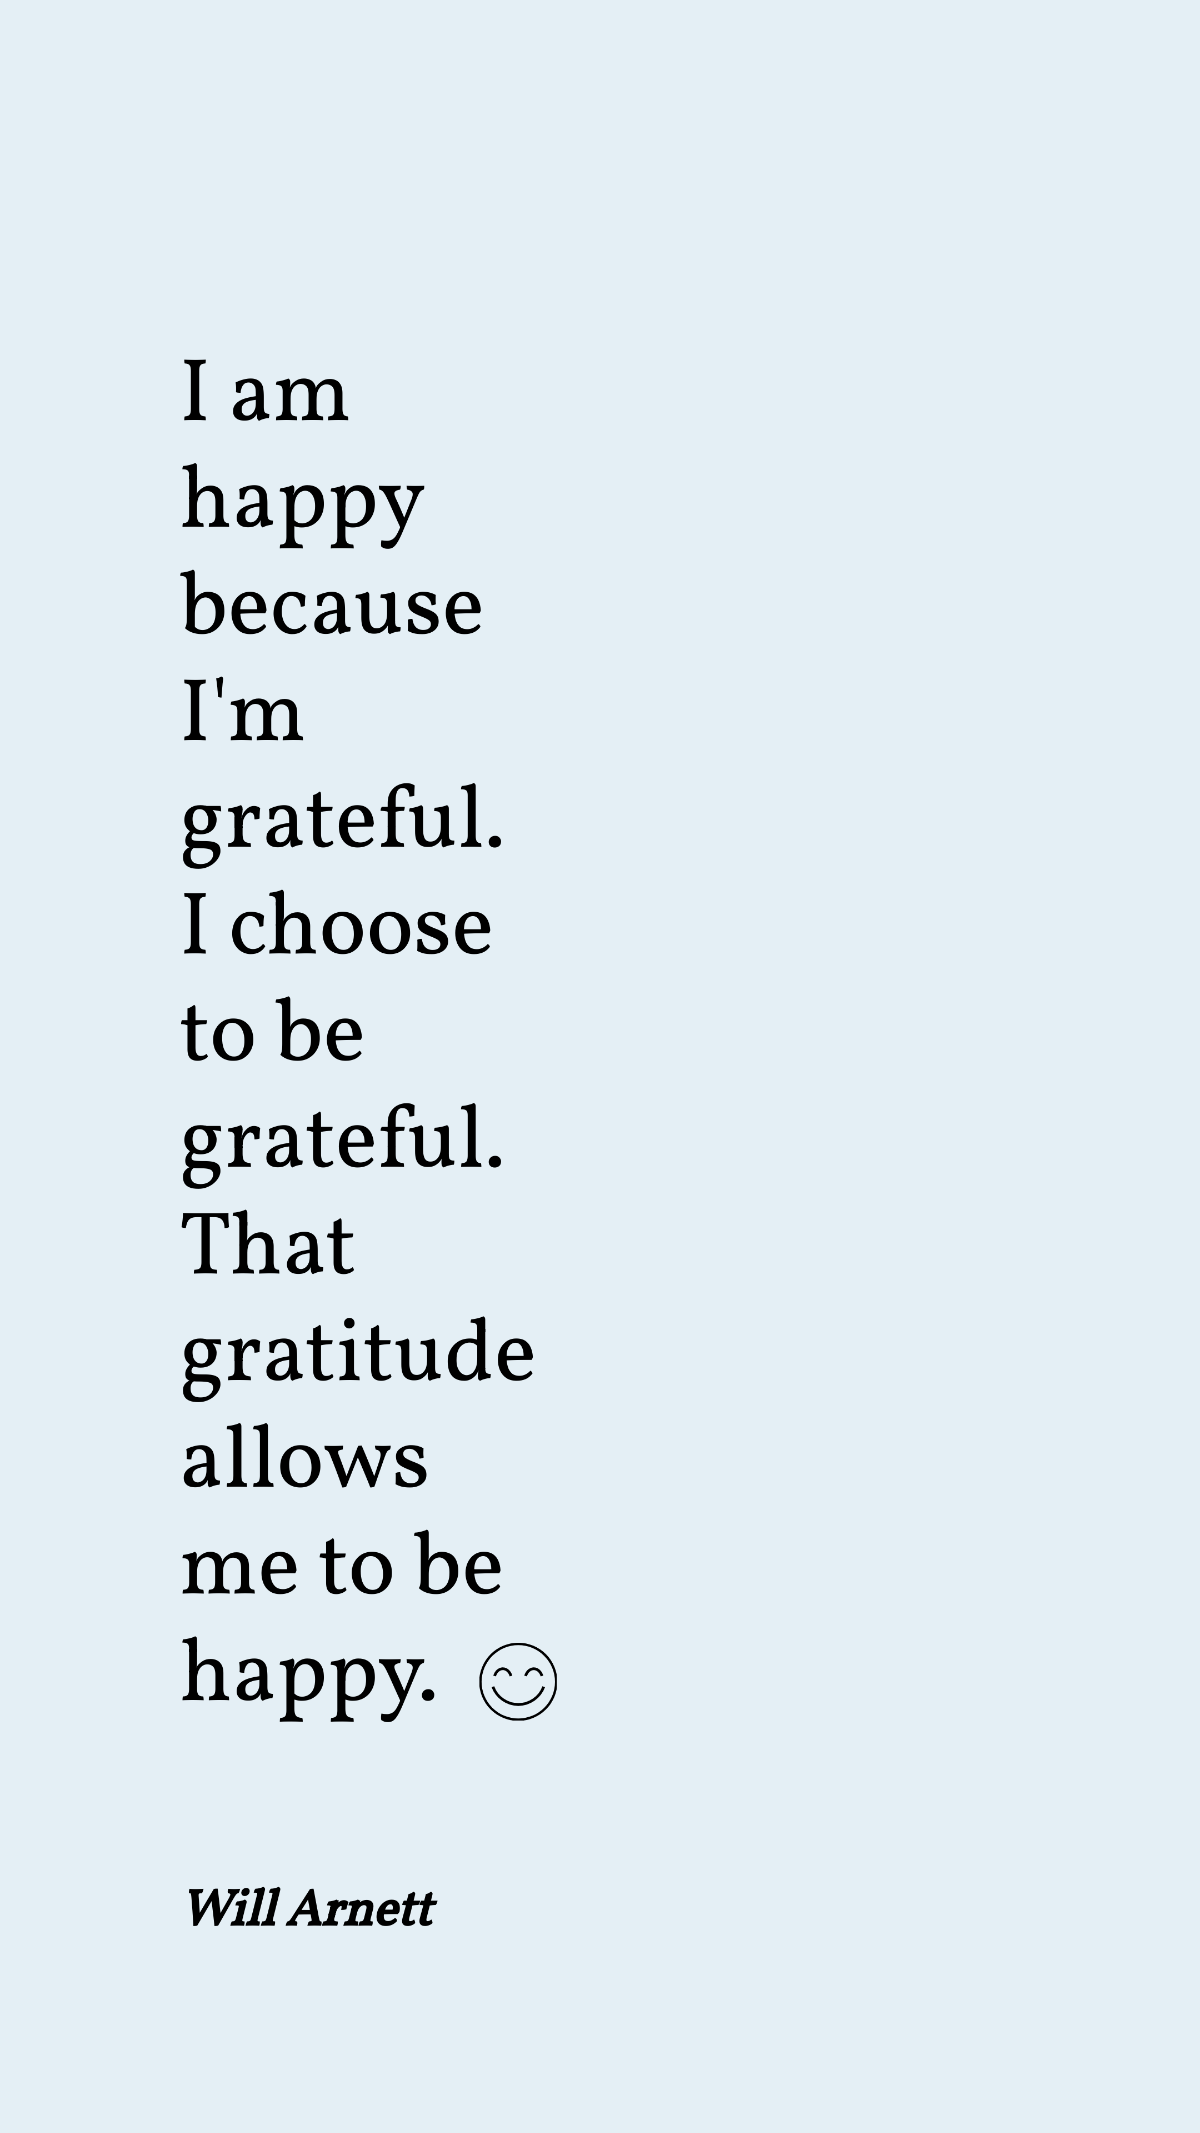 Will Arnett - I am happy because I'm grateful. I choose to be grateful. That gratitude allows me to be happy. Template